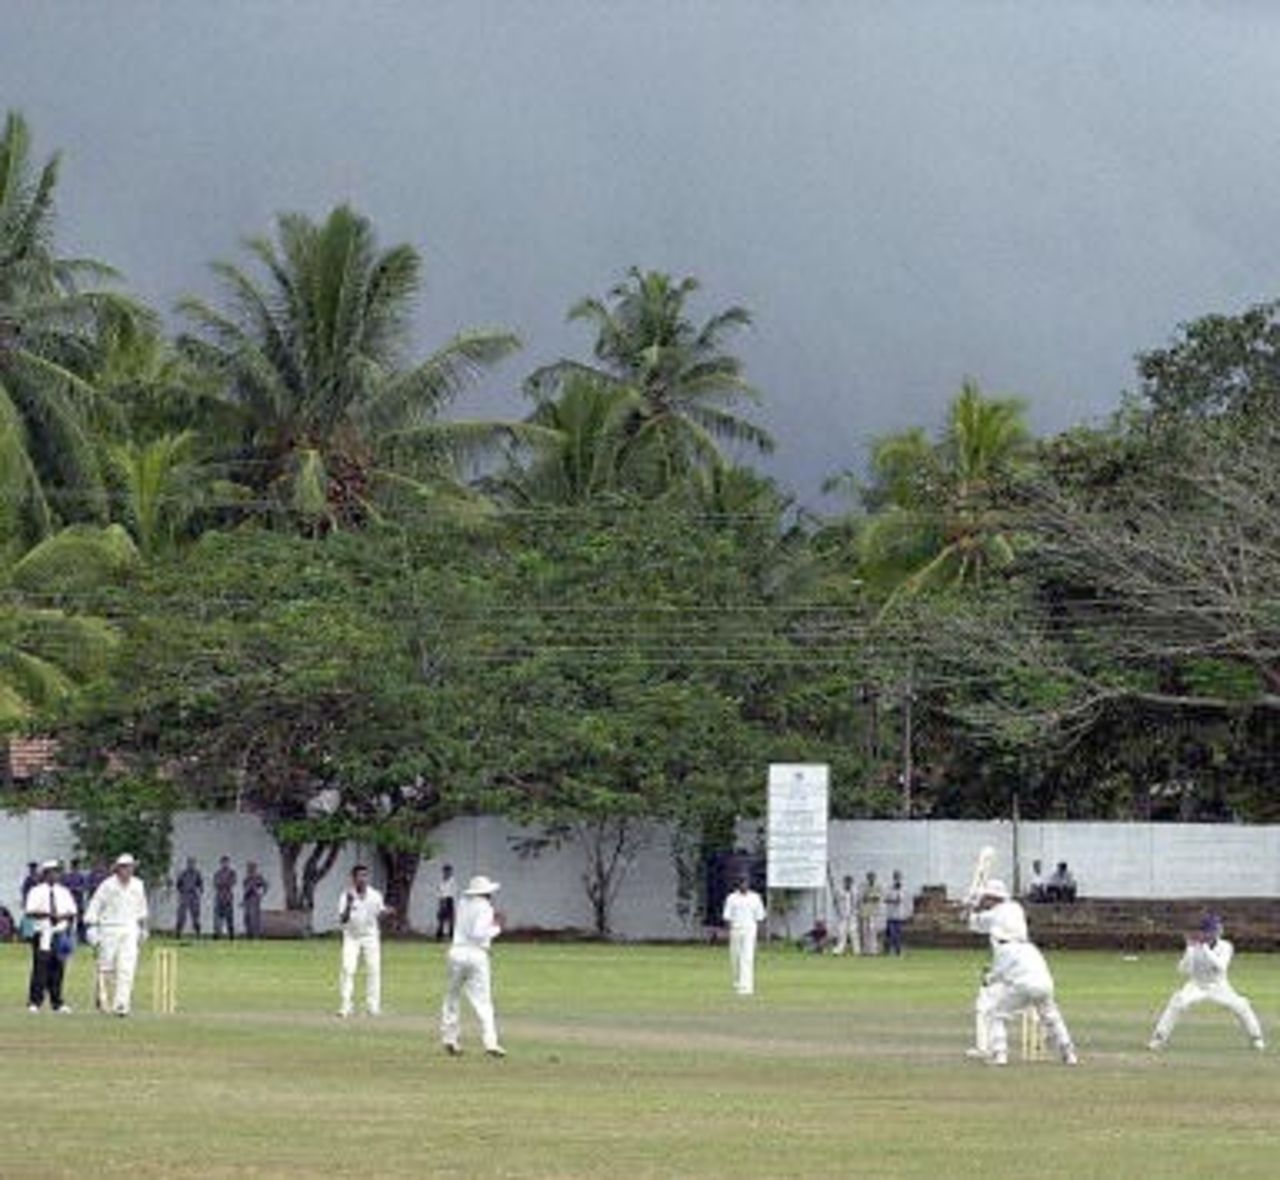 The sky line indicates the impending rain which stopped the game on the second day of England's four-day match against a Board President's XI at Matara in Southern Sri Lanka 16 February 2001. England replying to the Board President's XI total of 253 were 173 for two wickets when the weather intervened.